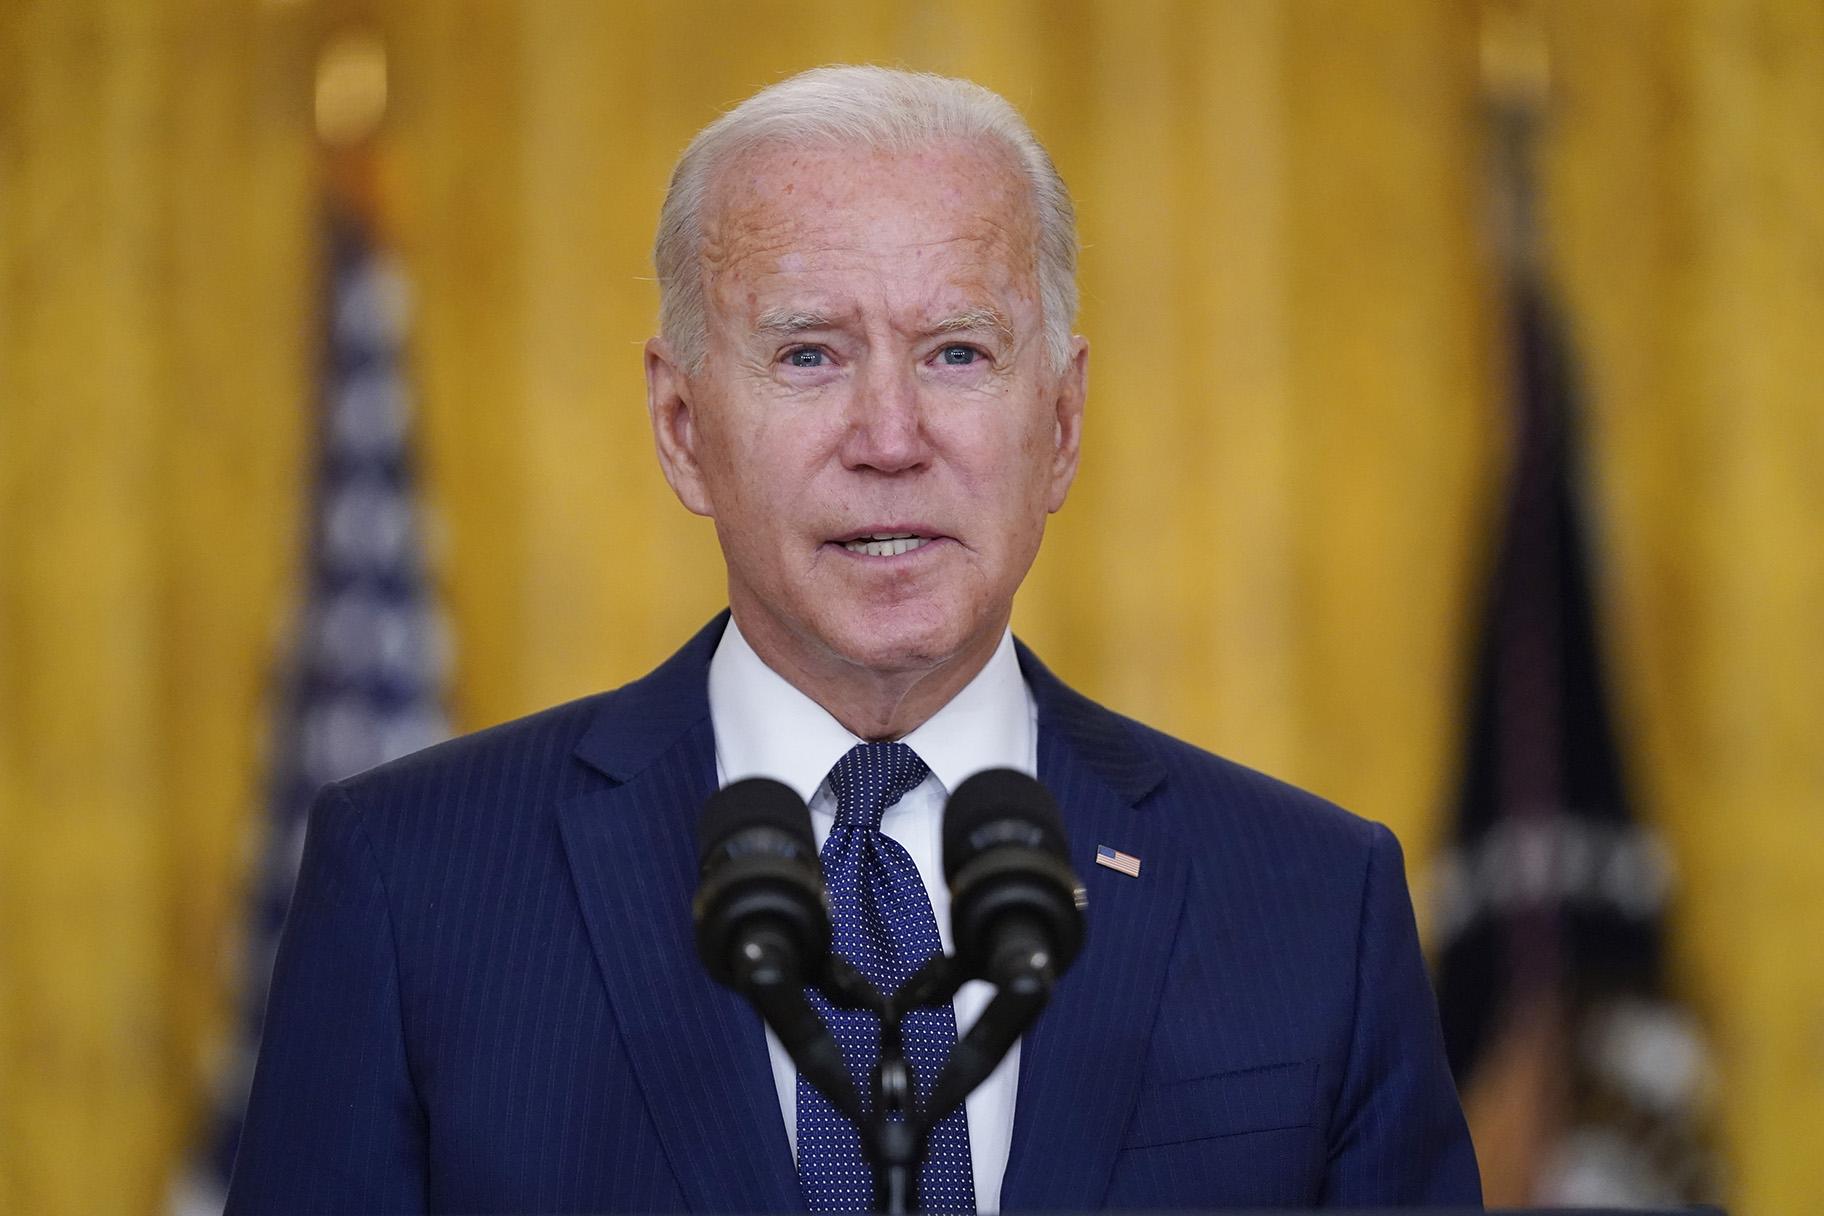 President Joe Biden speaks about the bombings at the Kabul airport that killed at least 12 U.S. service members, from the East Room of the White House, Thursday, Aug. 26, 2021, in Washington. (AP Photo / Evan Vucci)